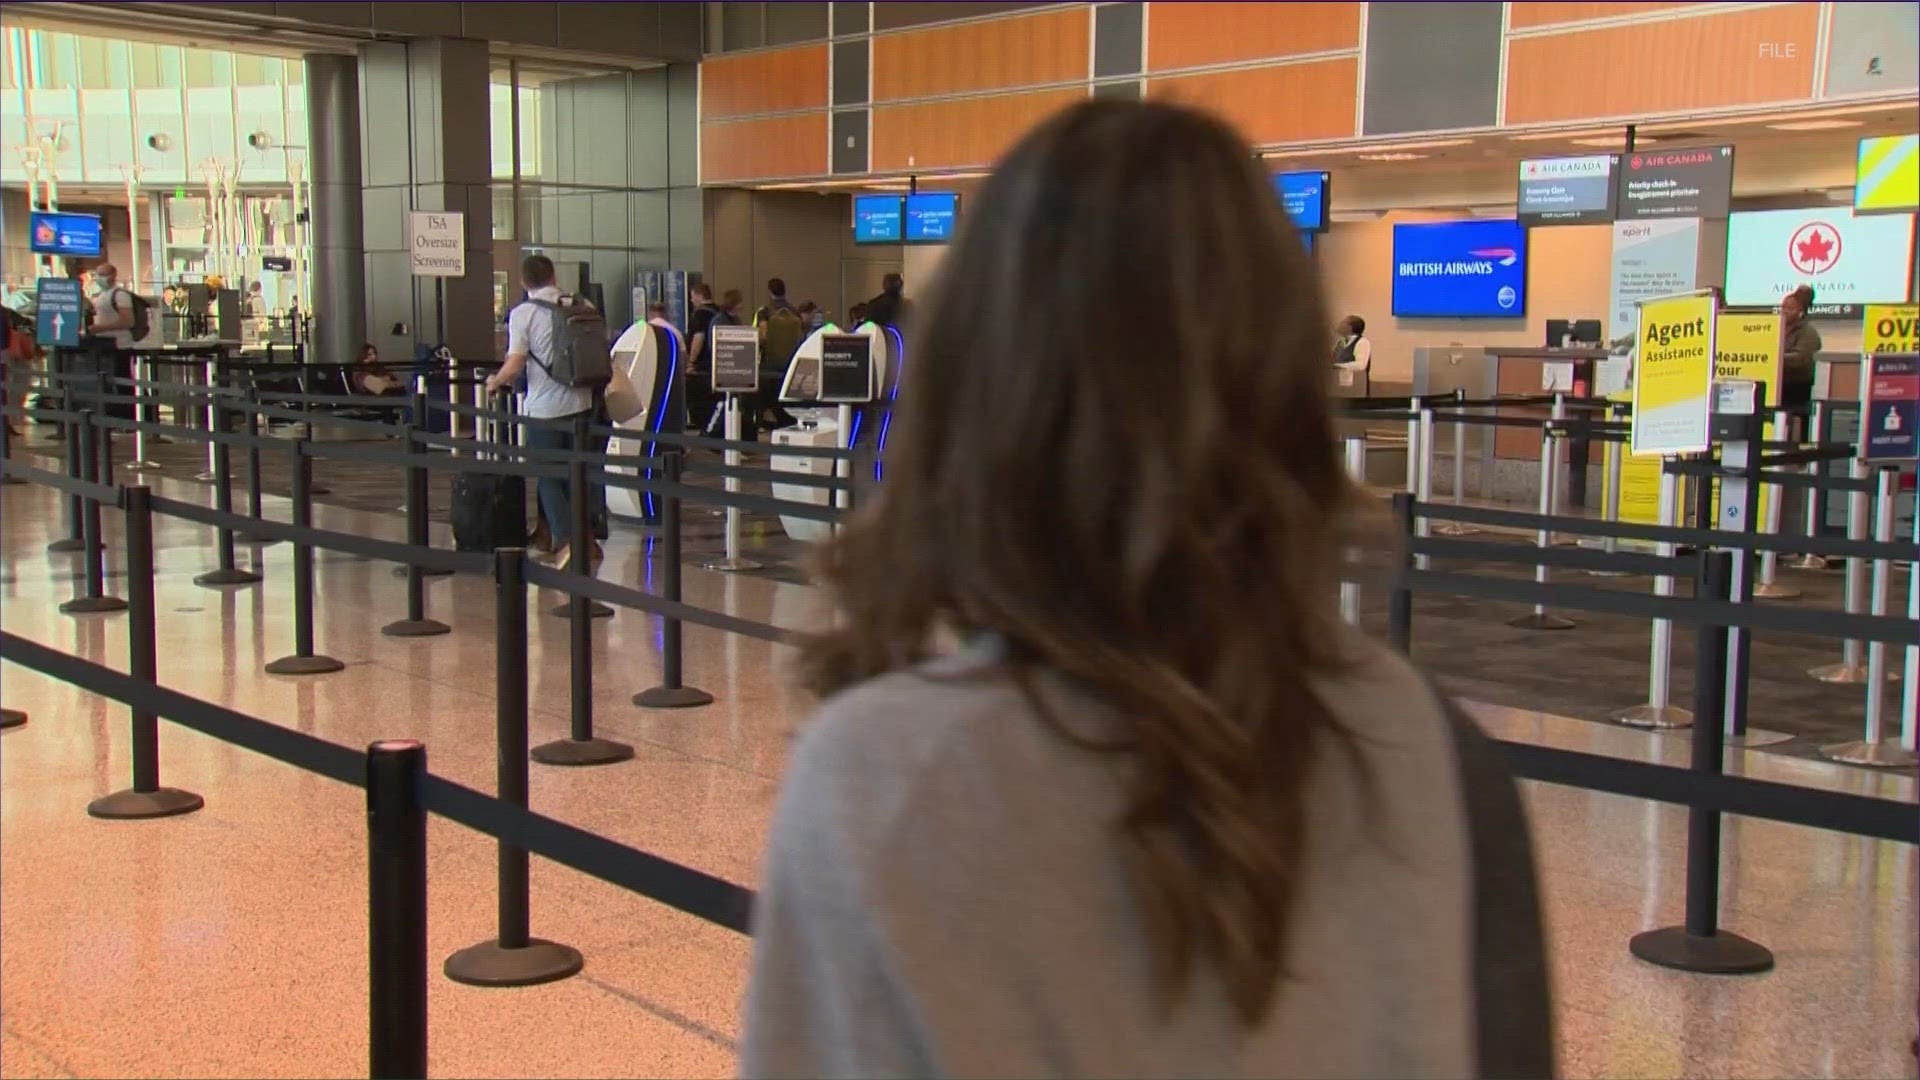 Monday is expected to be one of the busiest days in the history of the Austin airport.